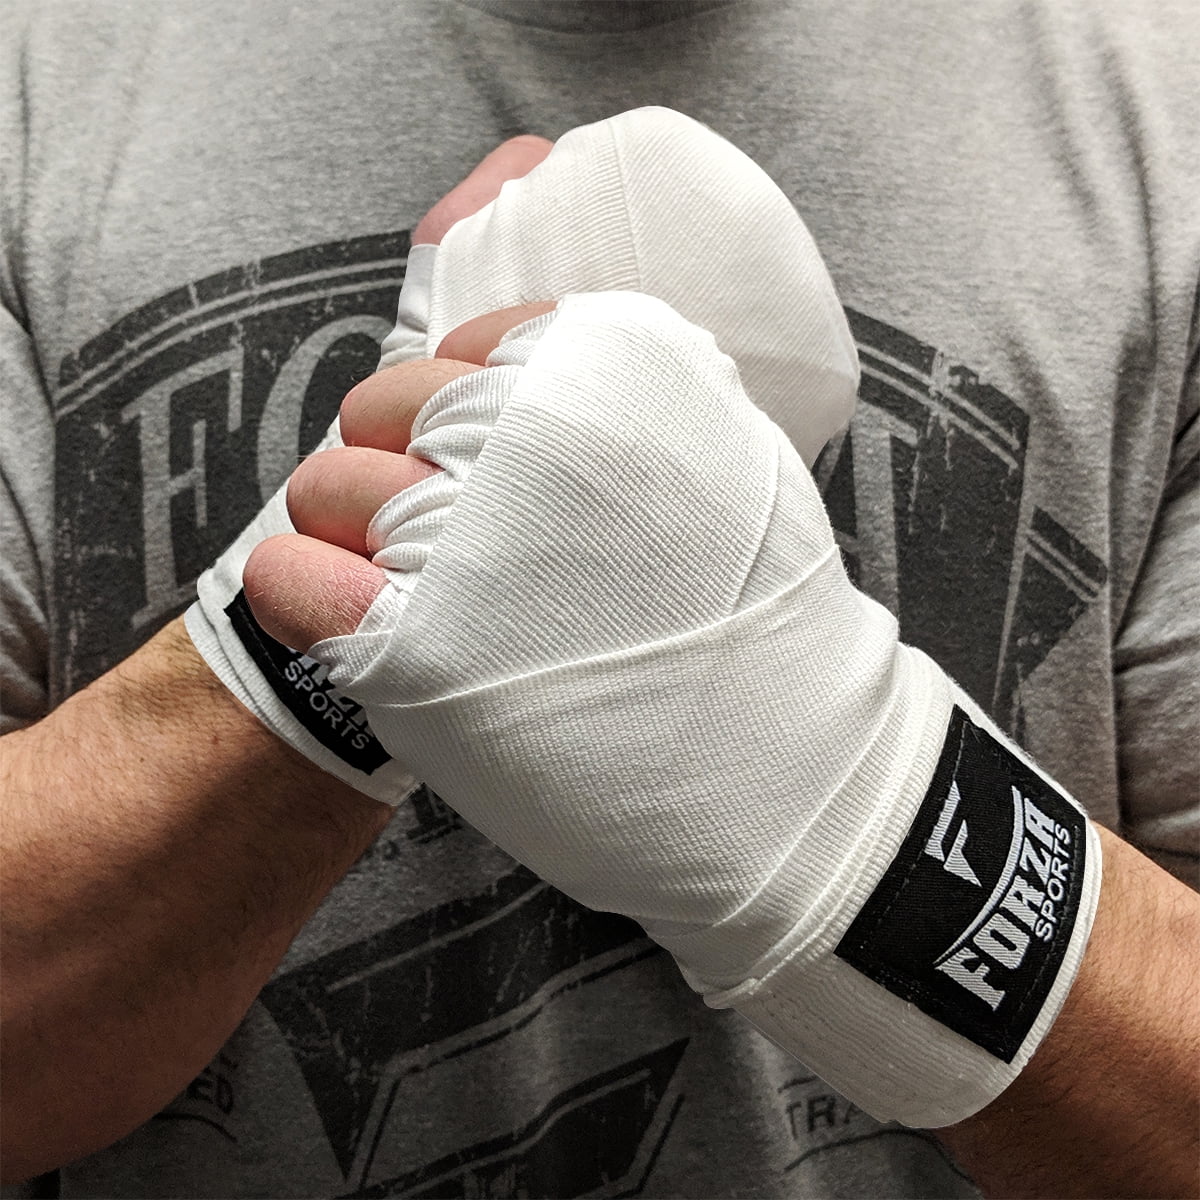 3.5m Hand Wraps Inner Boxing Gloves MMA Training Cotton Bandages Mitts Boom Pro 